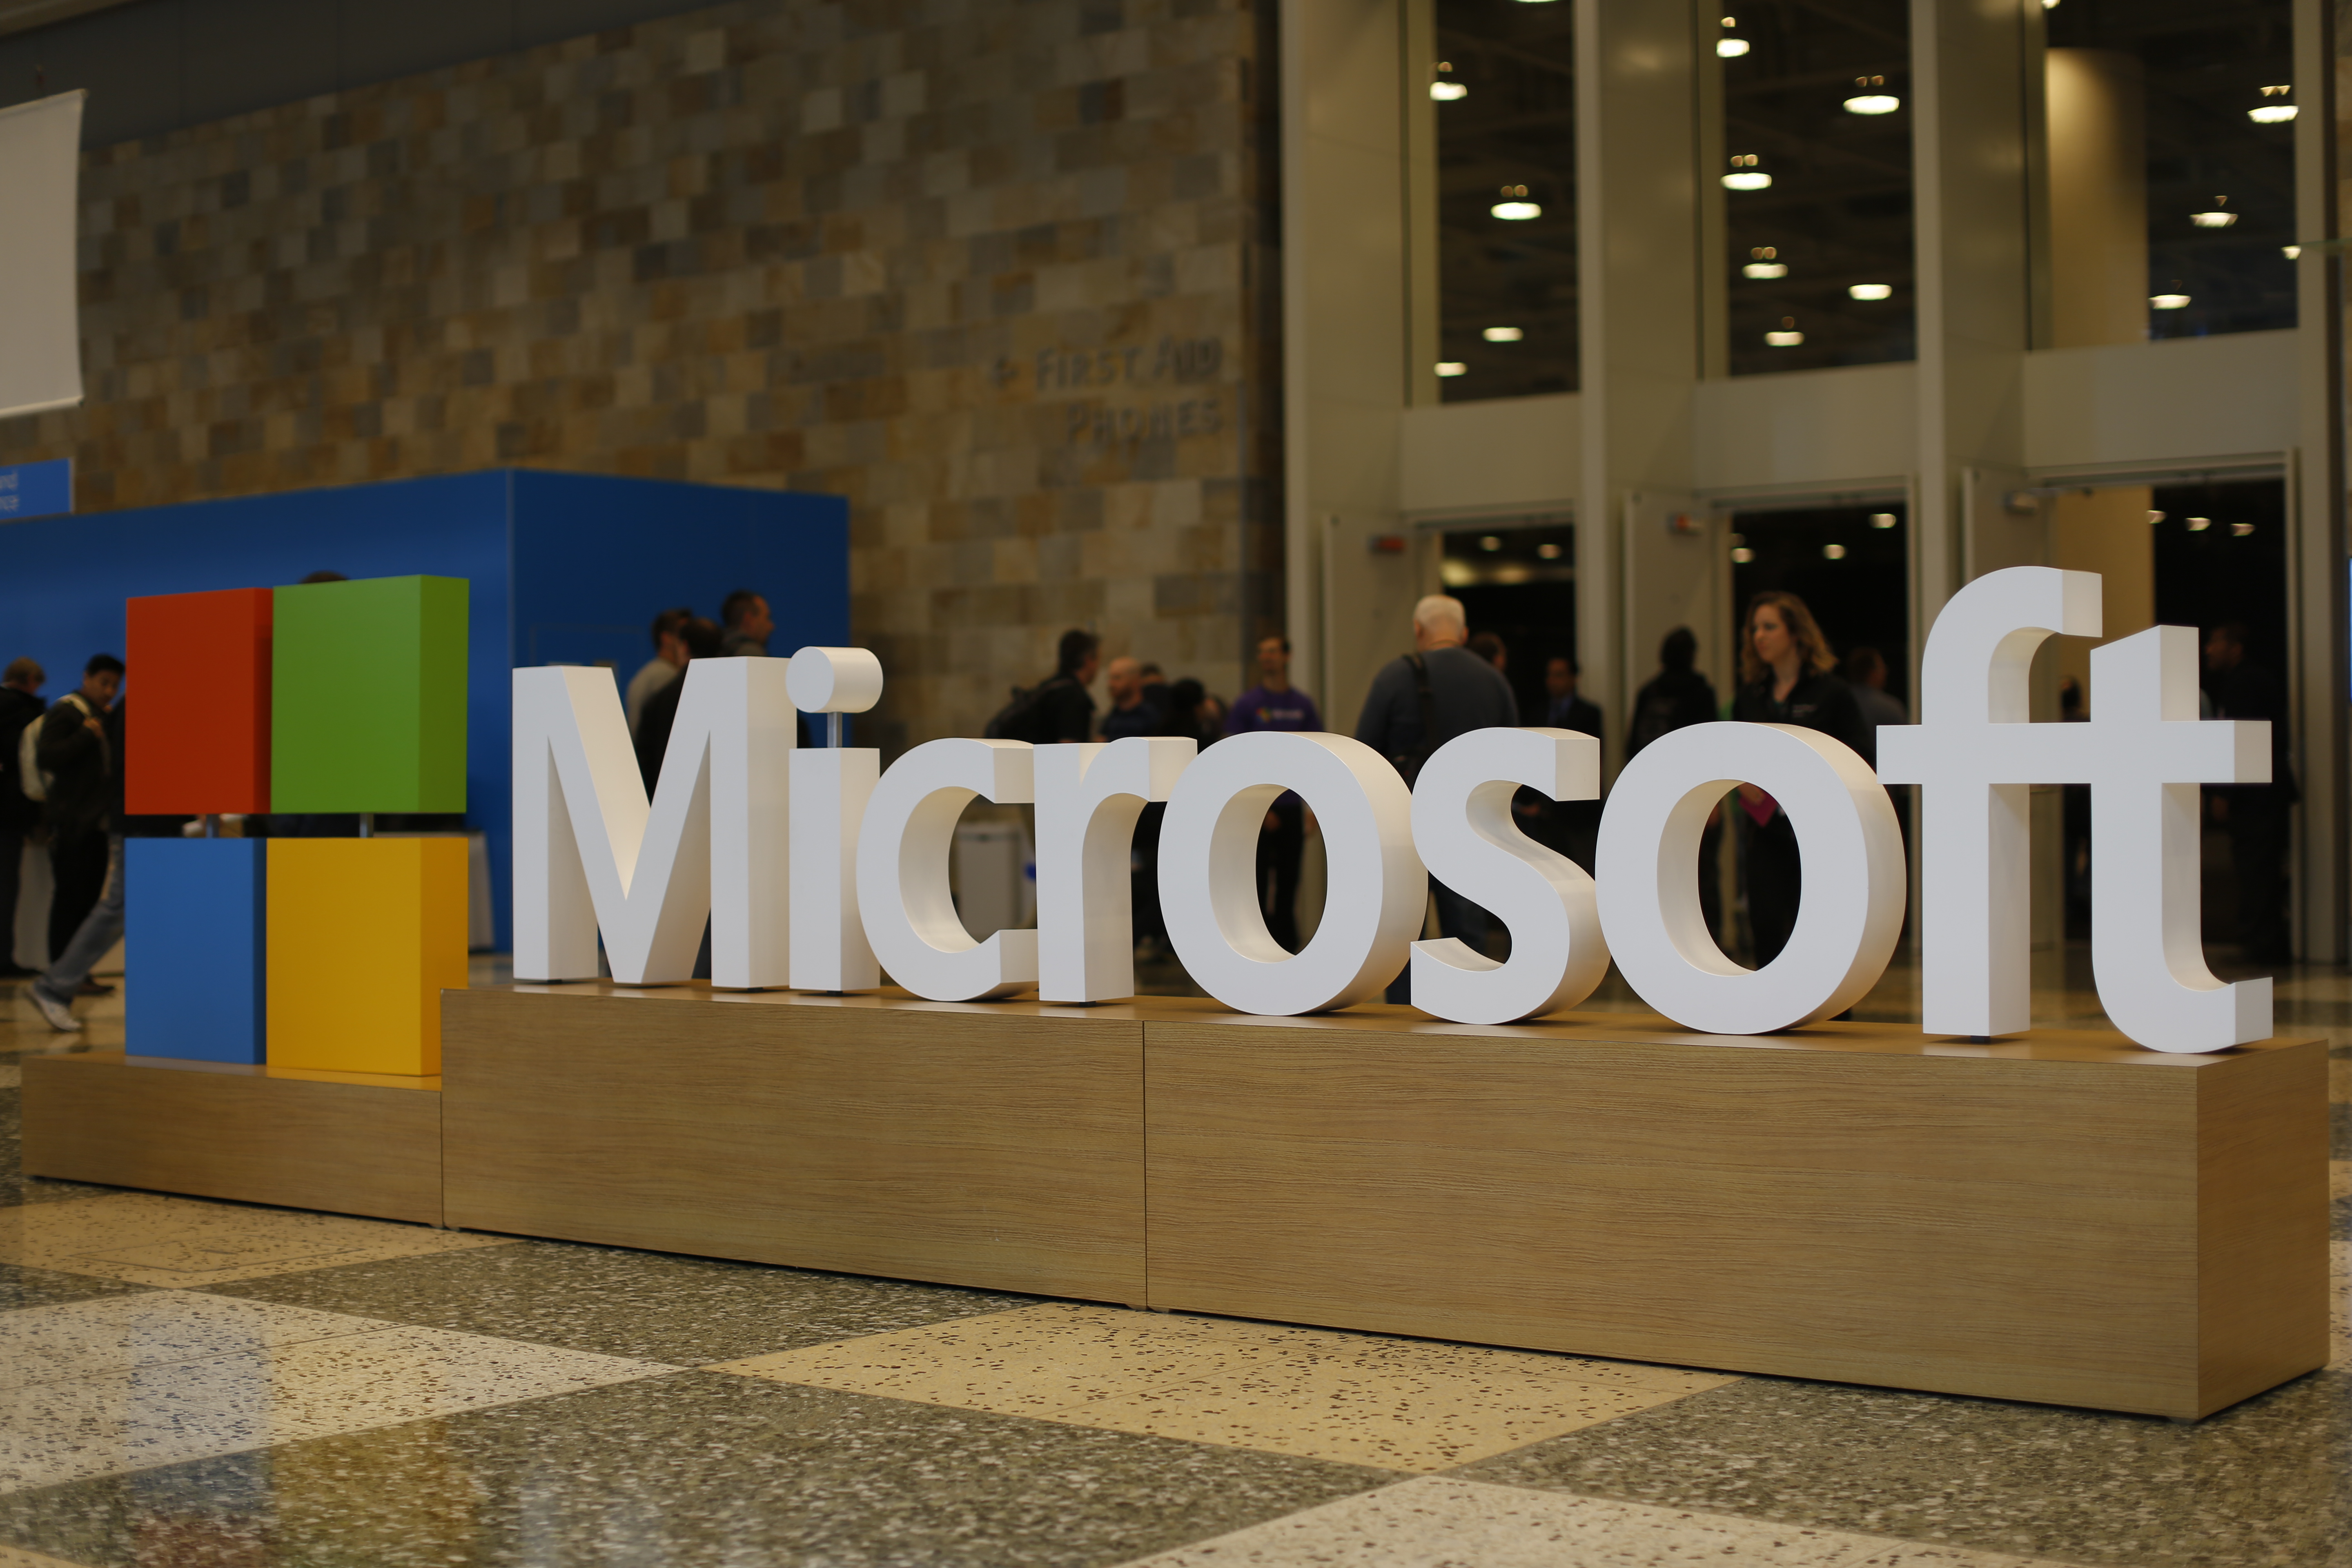 SAN FRANCISCO, CA - APRIL 29: A Microsoft logo is seen during the 2015 Microsoft Build Conference on April 29, 2015 at Moscone Center in San Francisco, California. Thousands are expected to attend the annual developer conference which runs through May 1.   Stephen Lam/Getty Images/AFP